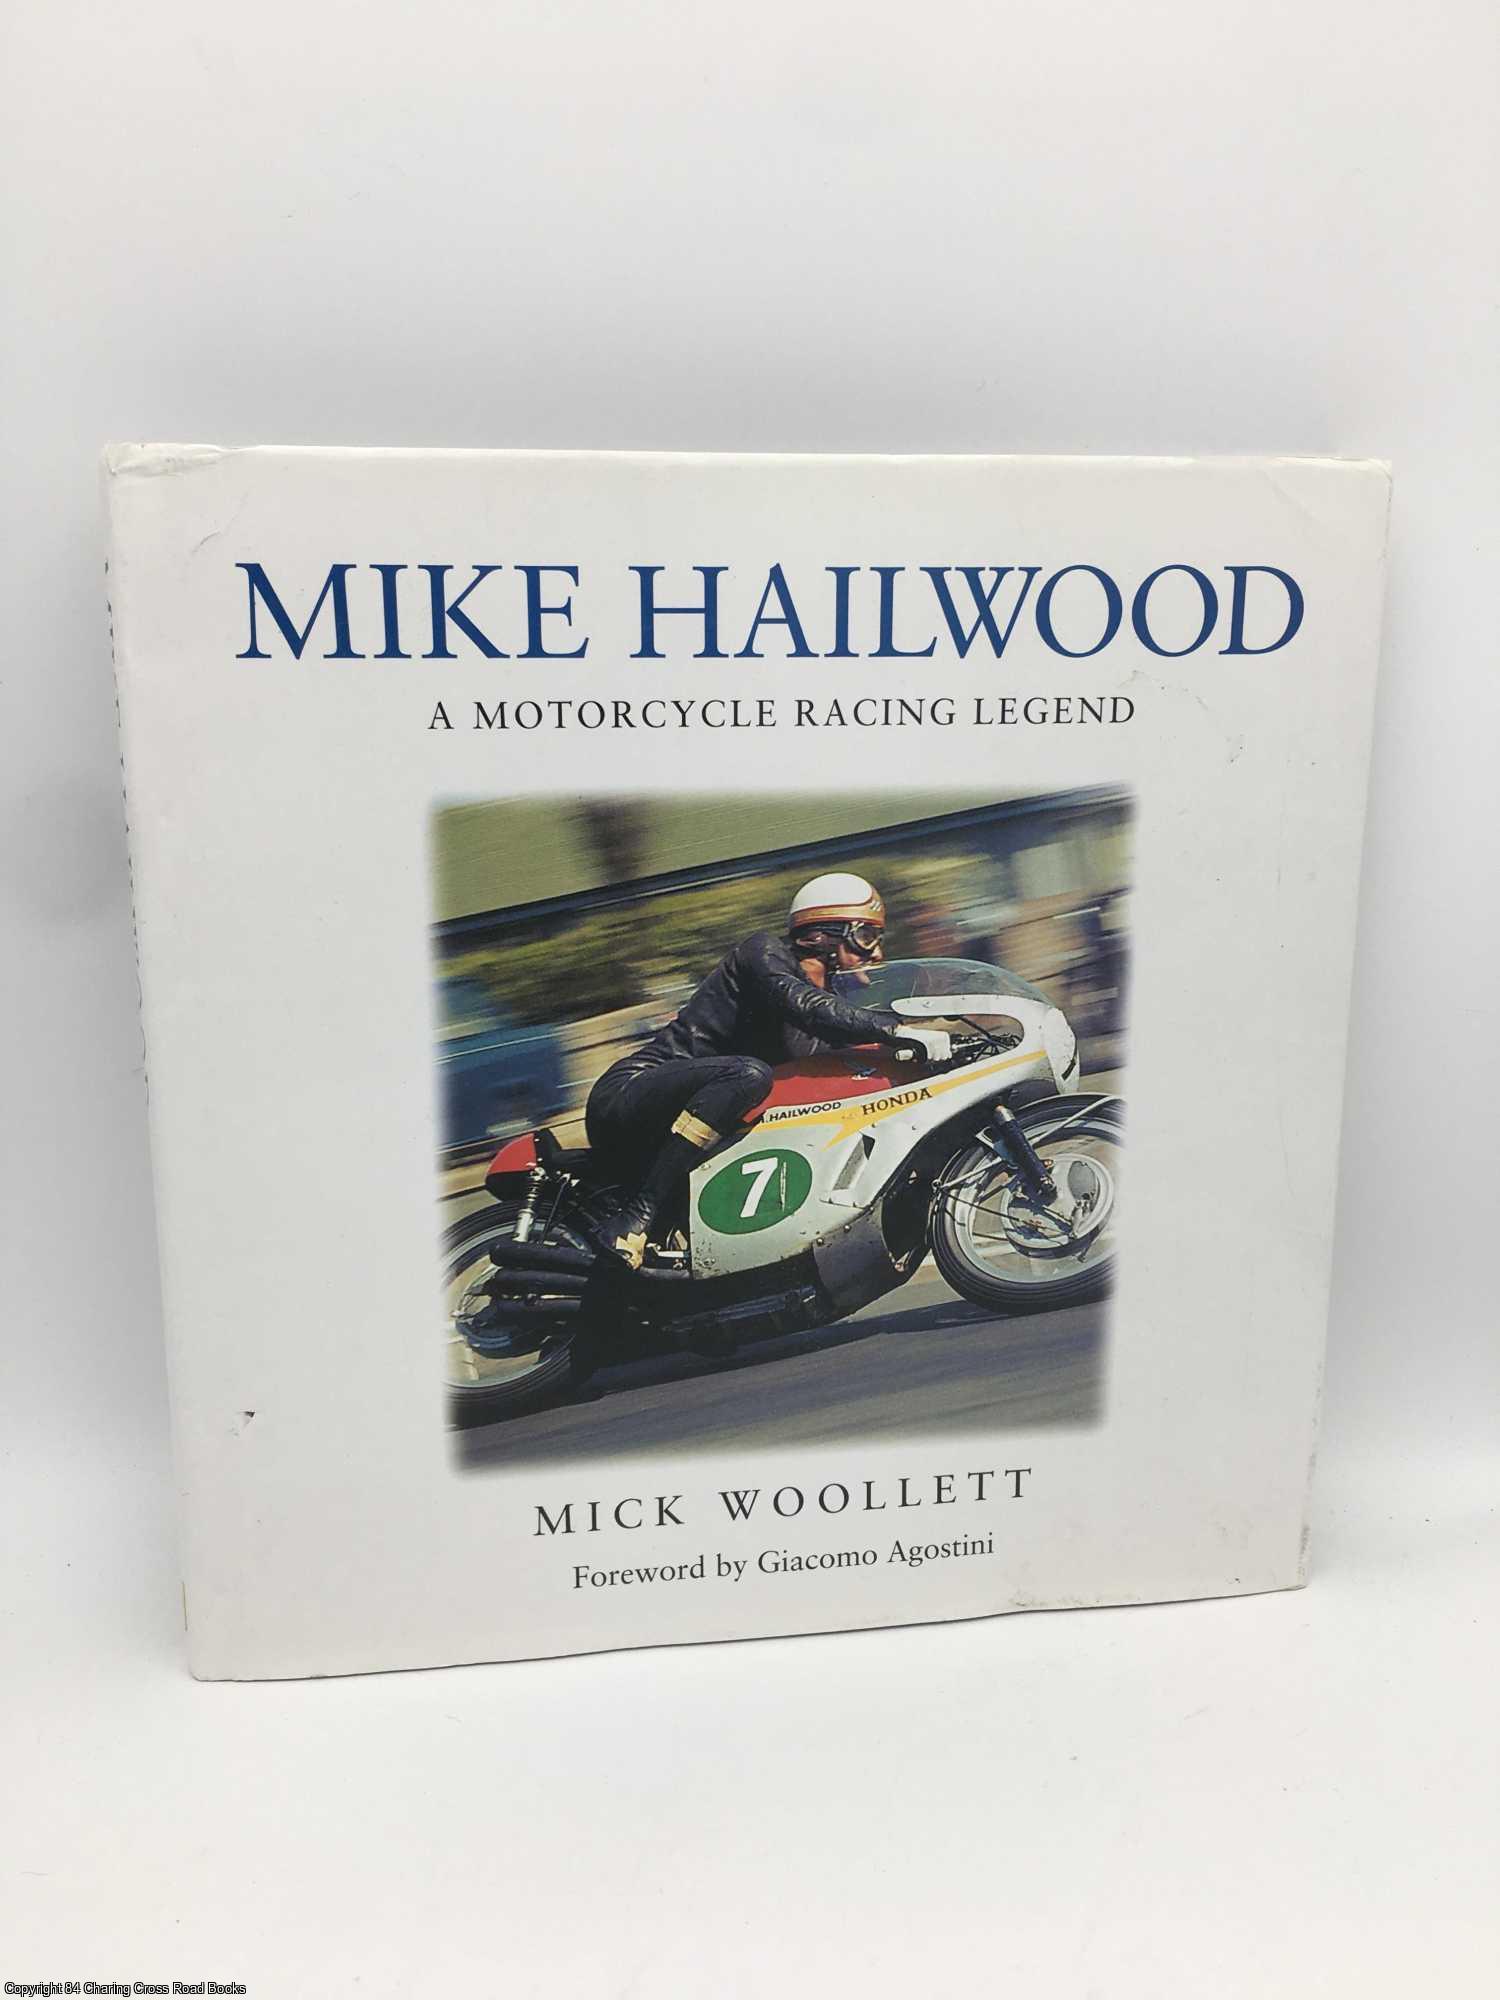 Mike Hailwood: A Motorcycle Racing Legend by Mick Woollett, Giacomo  Agostini on 84 Charing Cross Rare Books